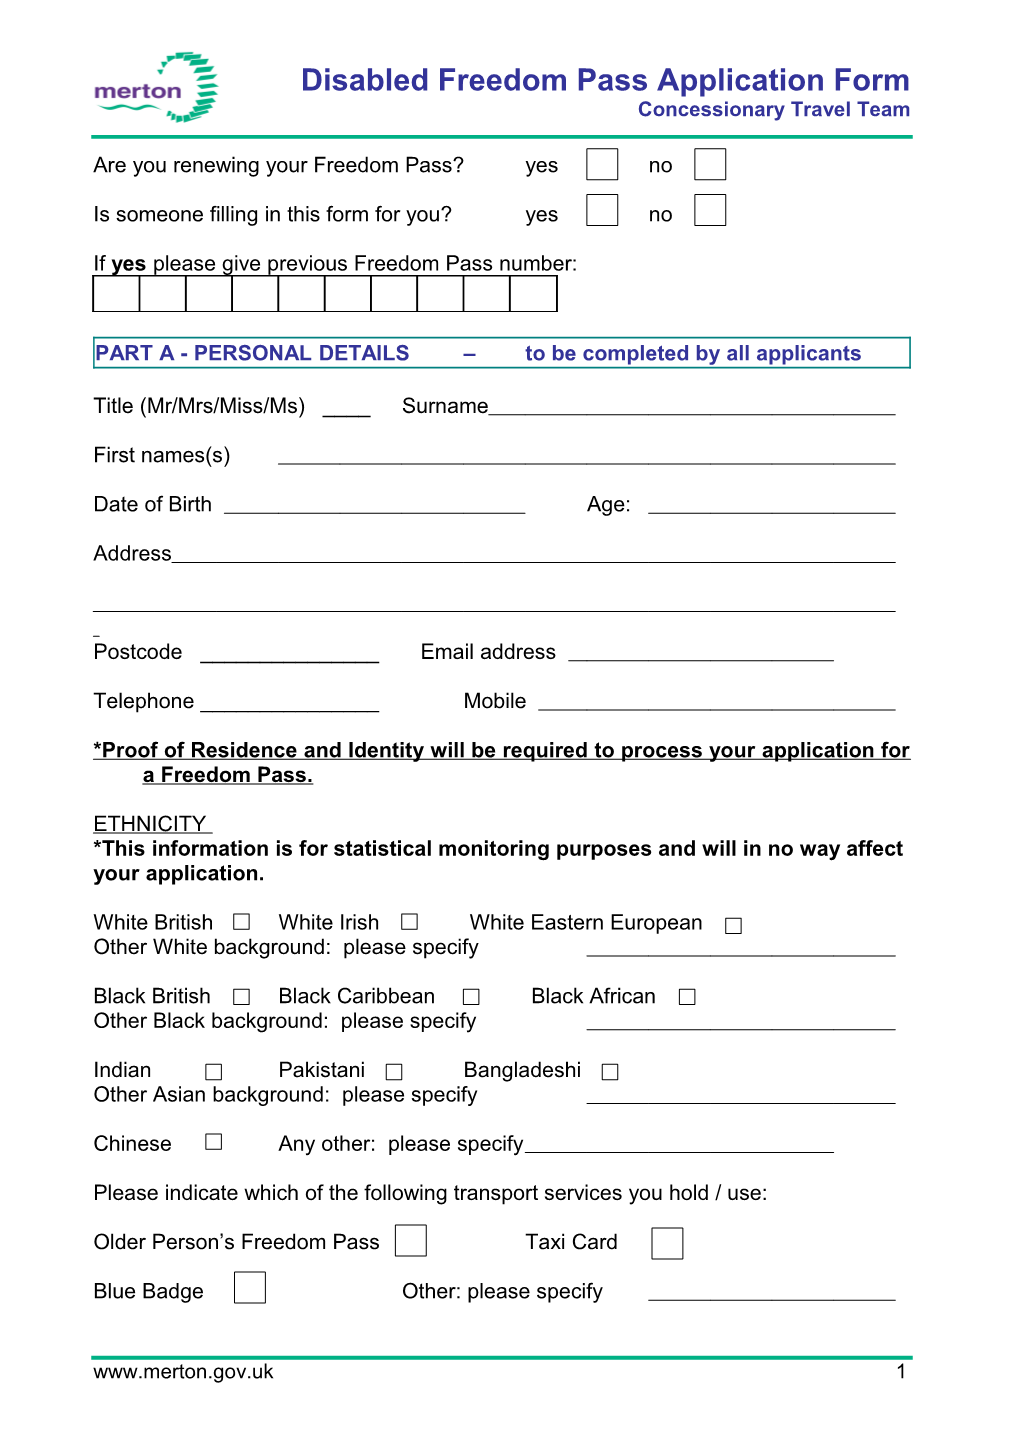 Disabled Freedom Pass Application Form